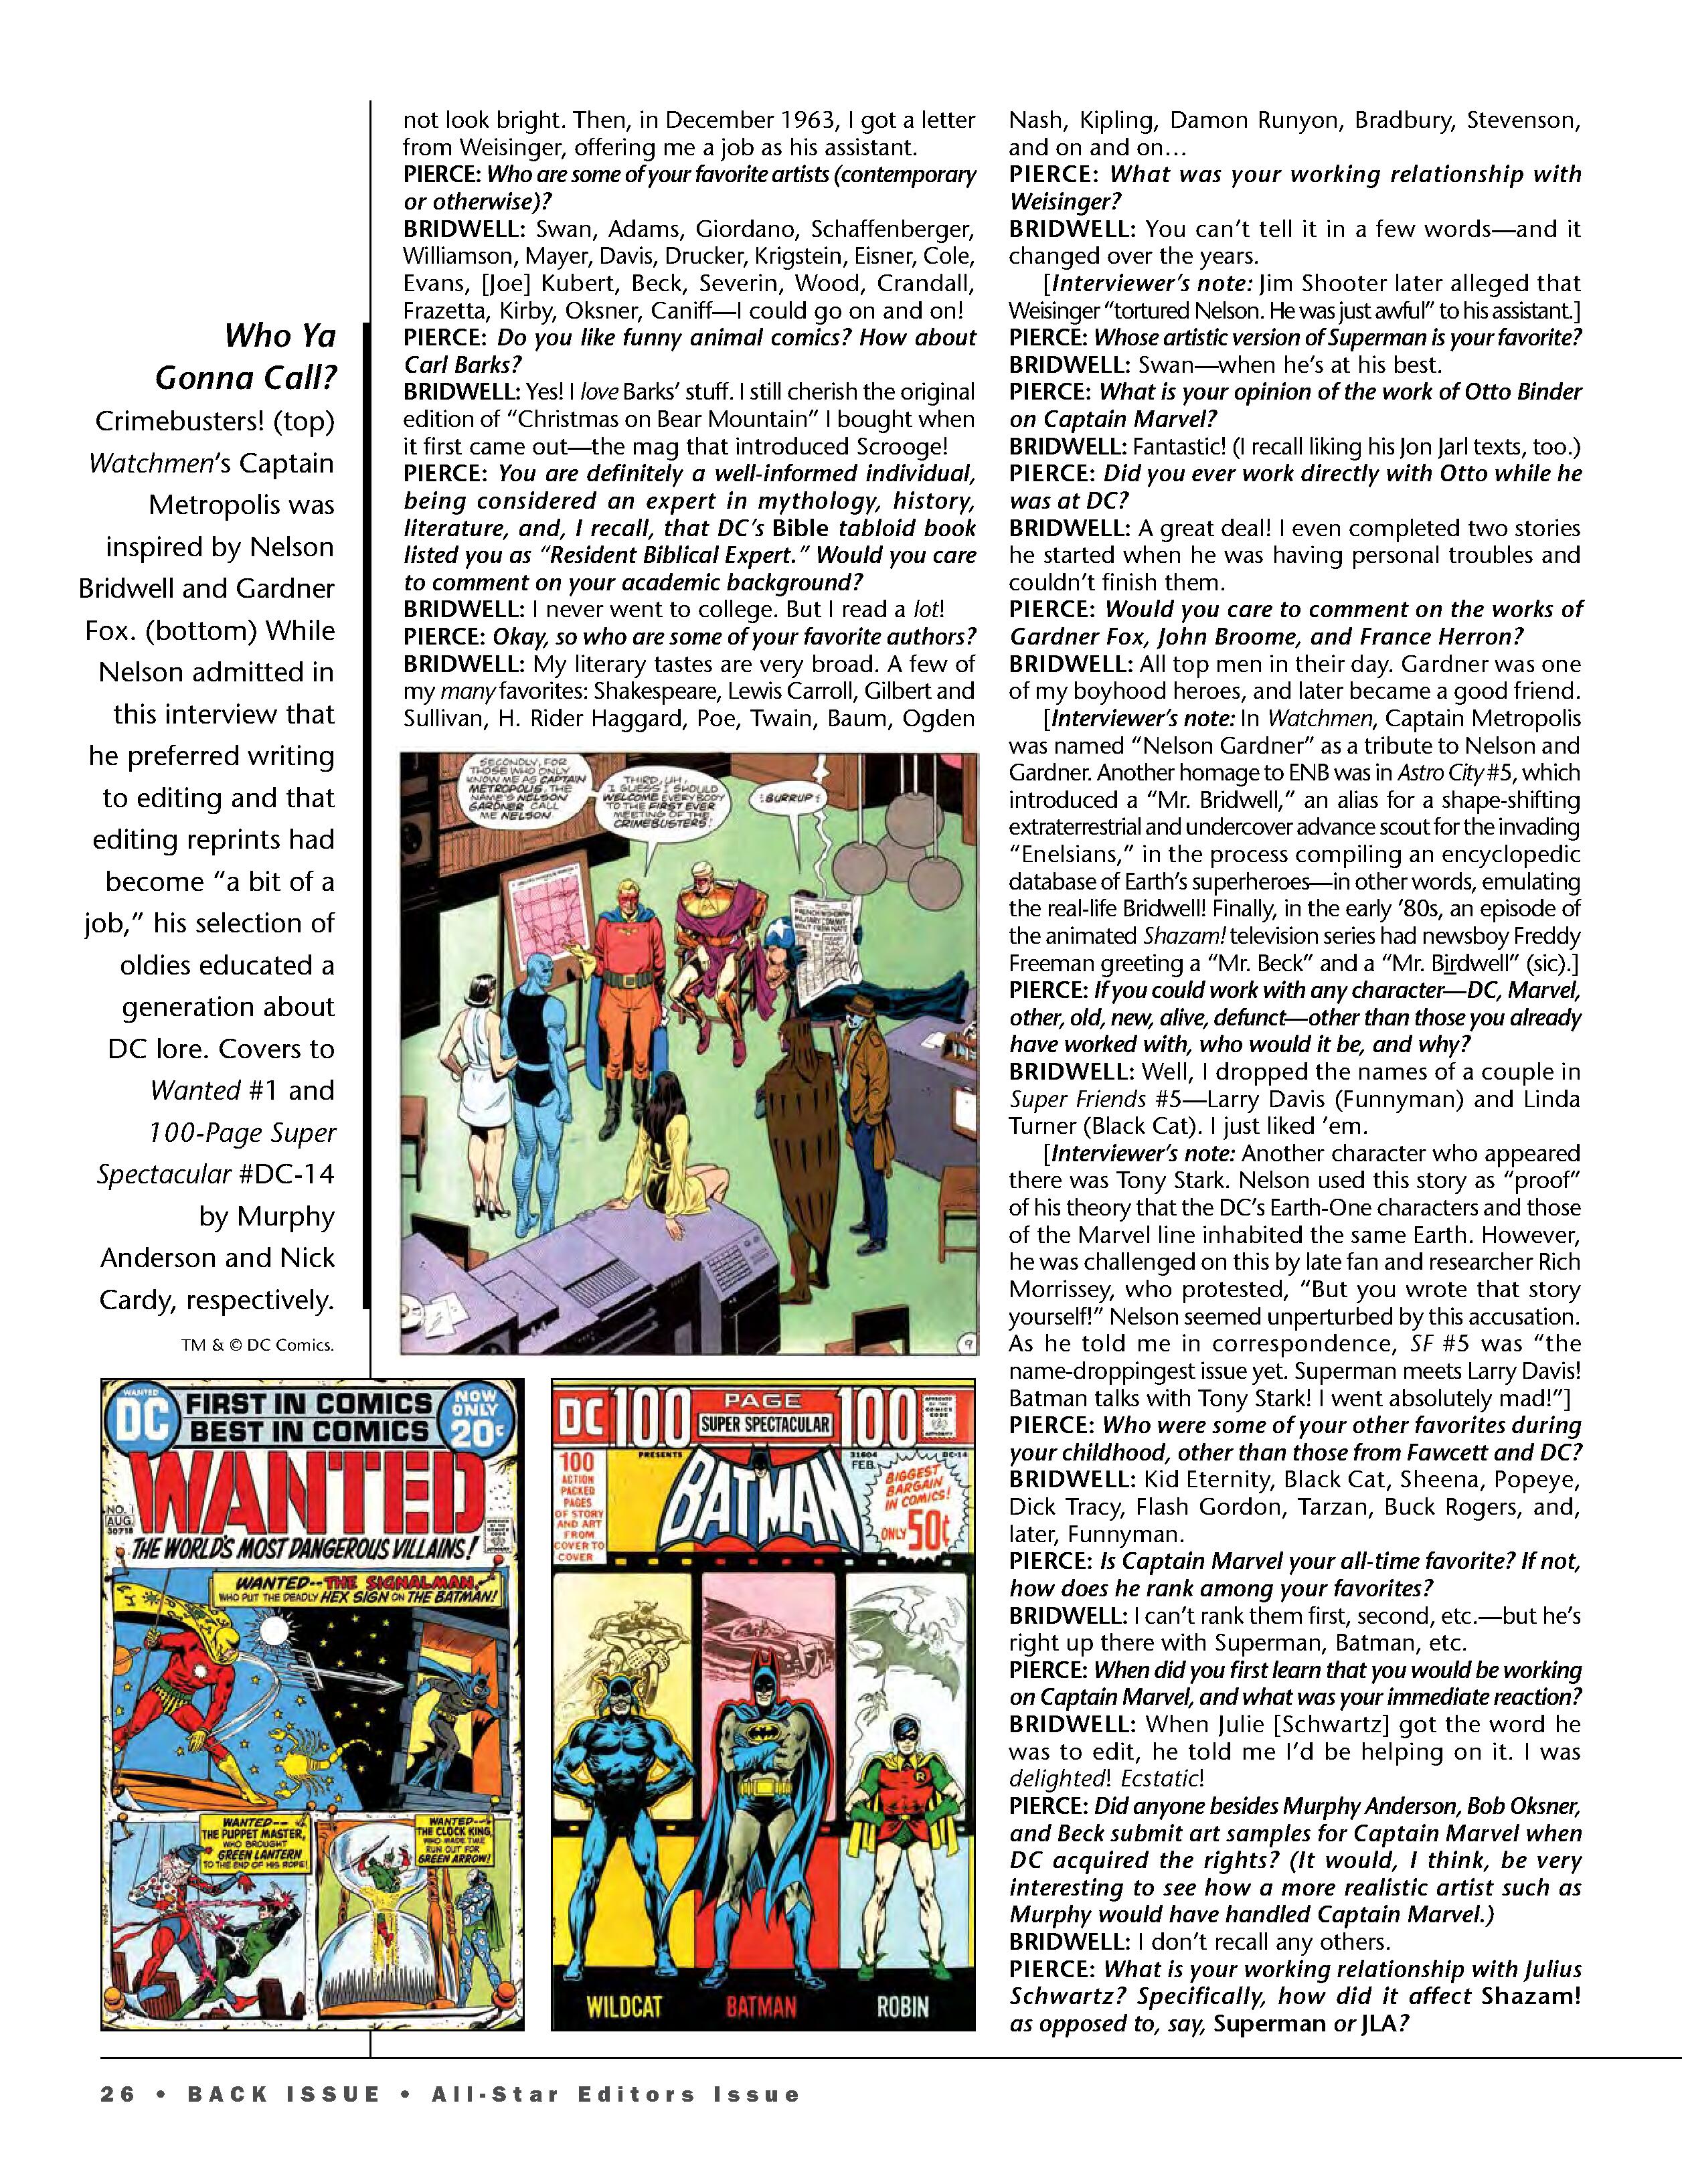 Read online Back Issue comic -  Issue #103 - 28